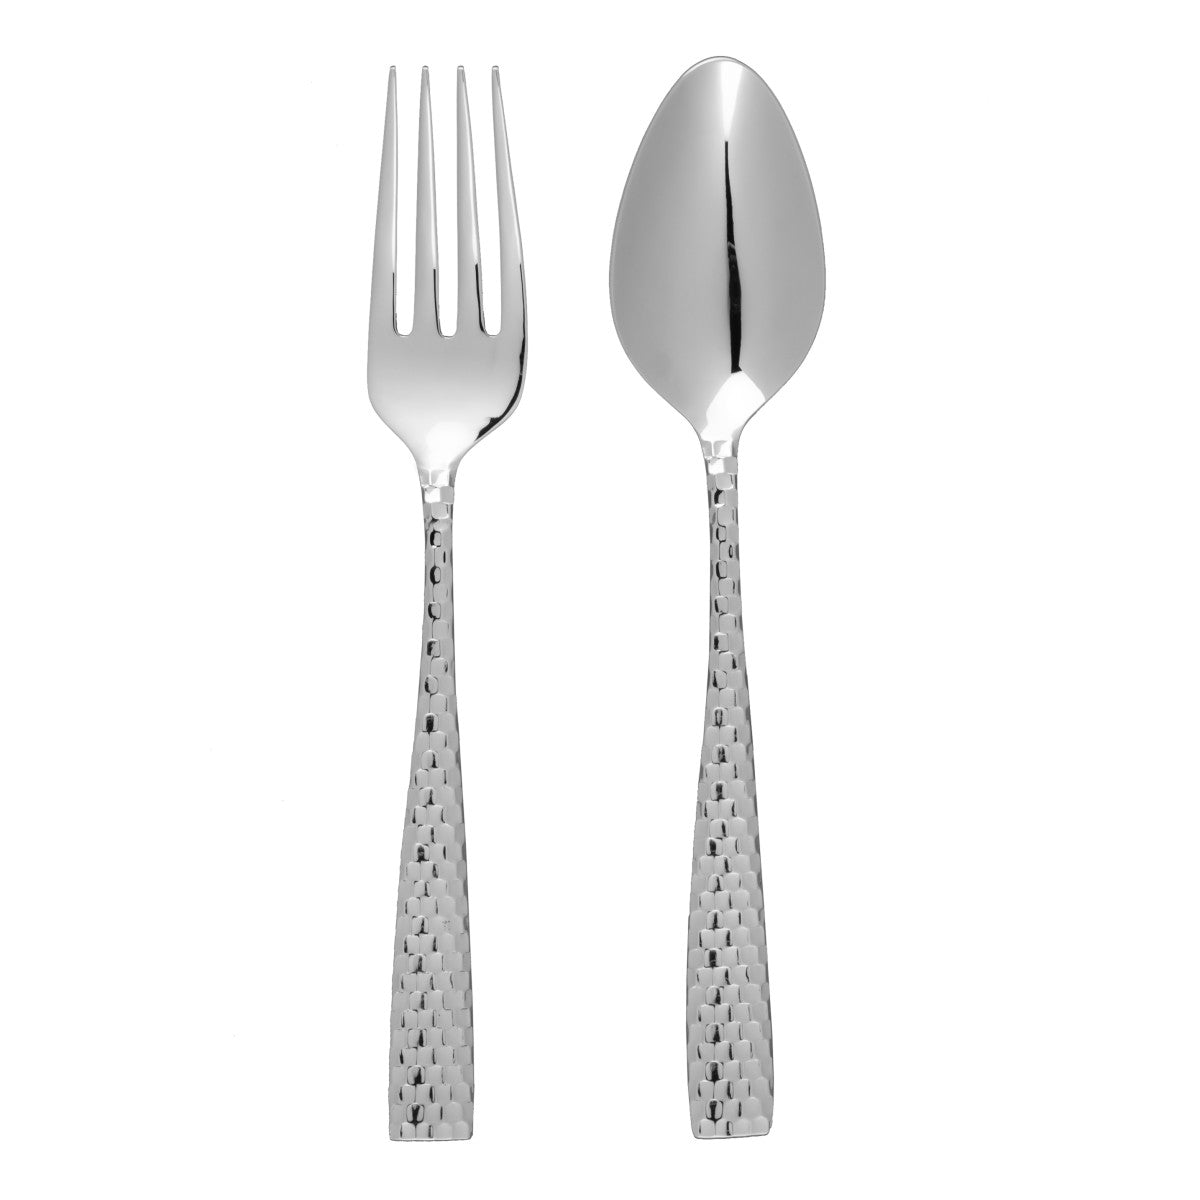 Lucca Faceted 2-piece serving set